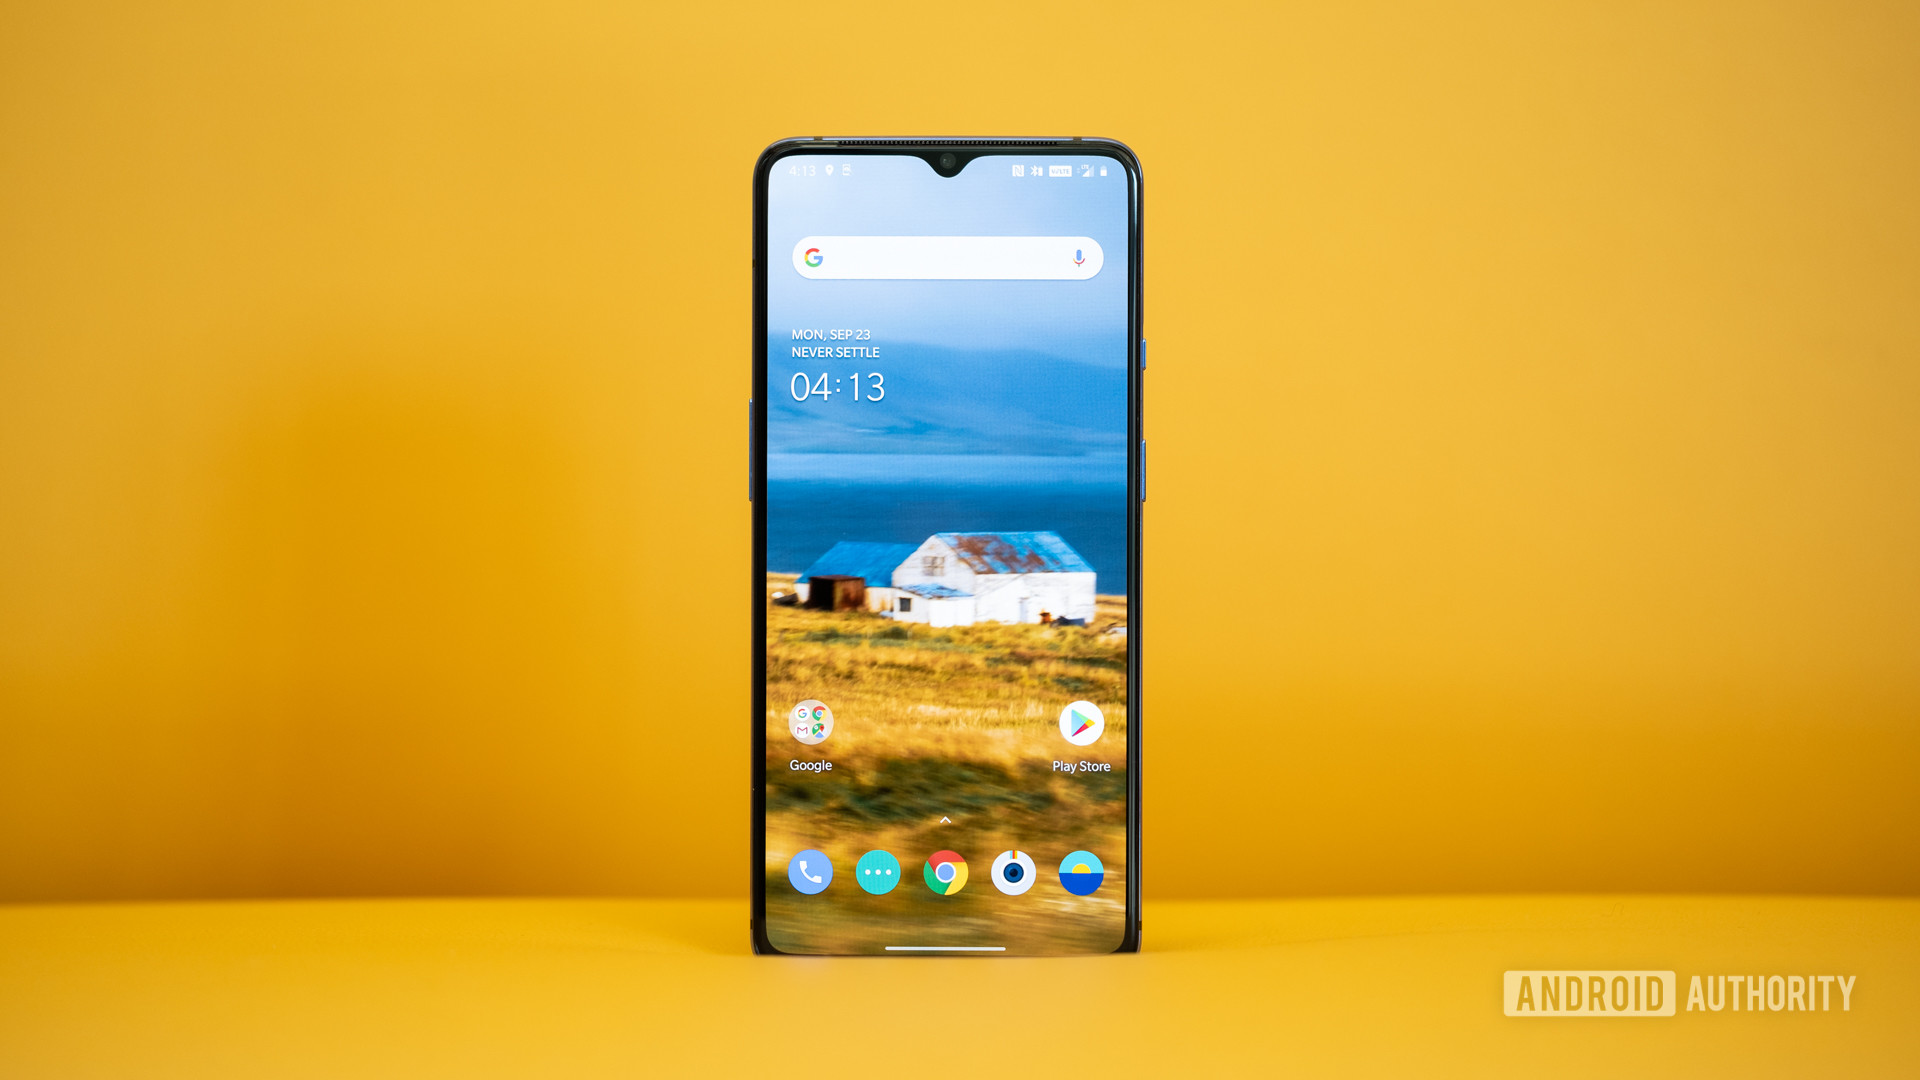 The OnePlus 7T specs include an improved screen and camera setup.